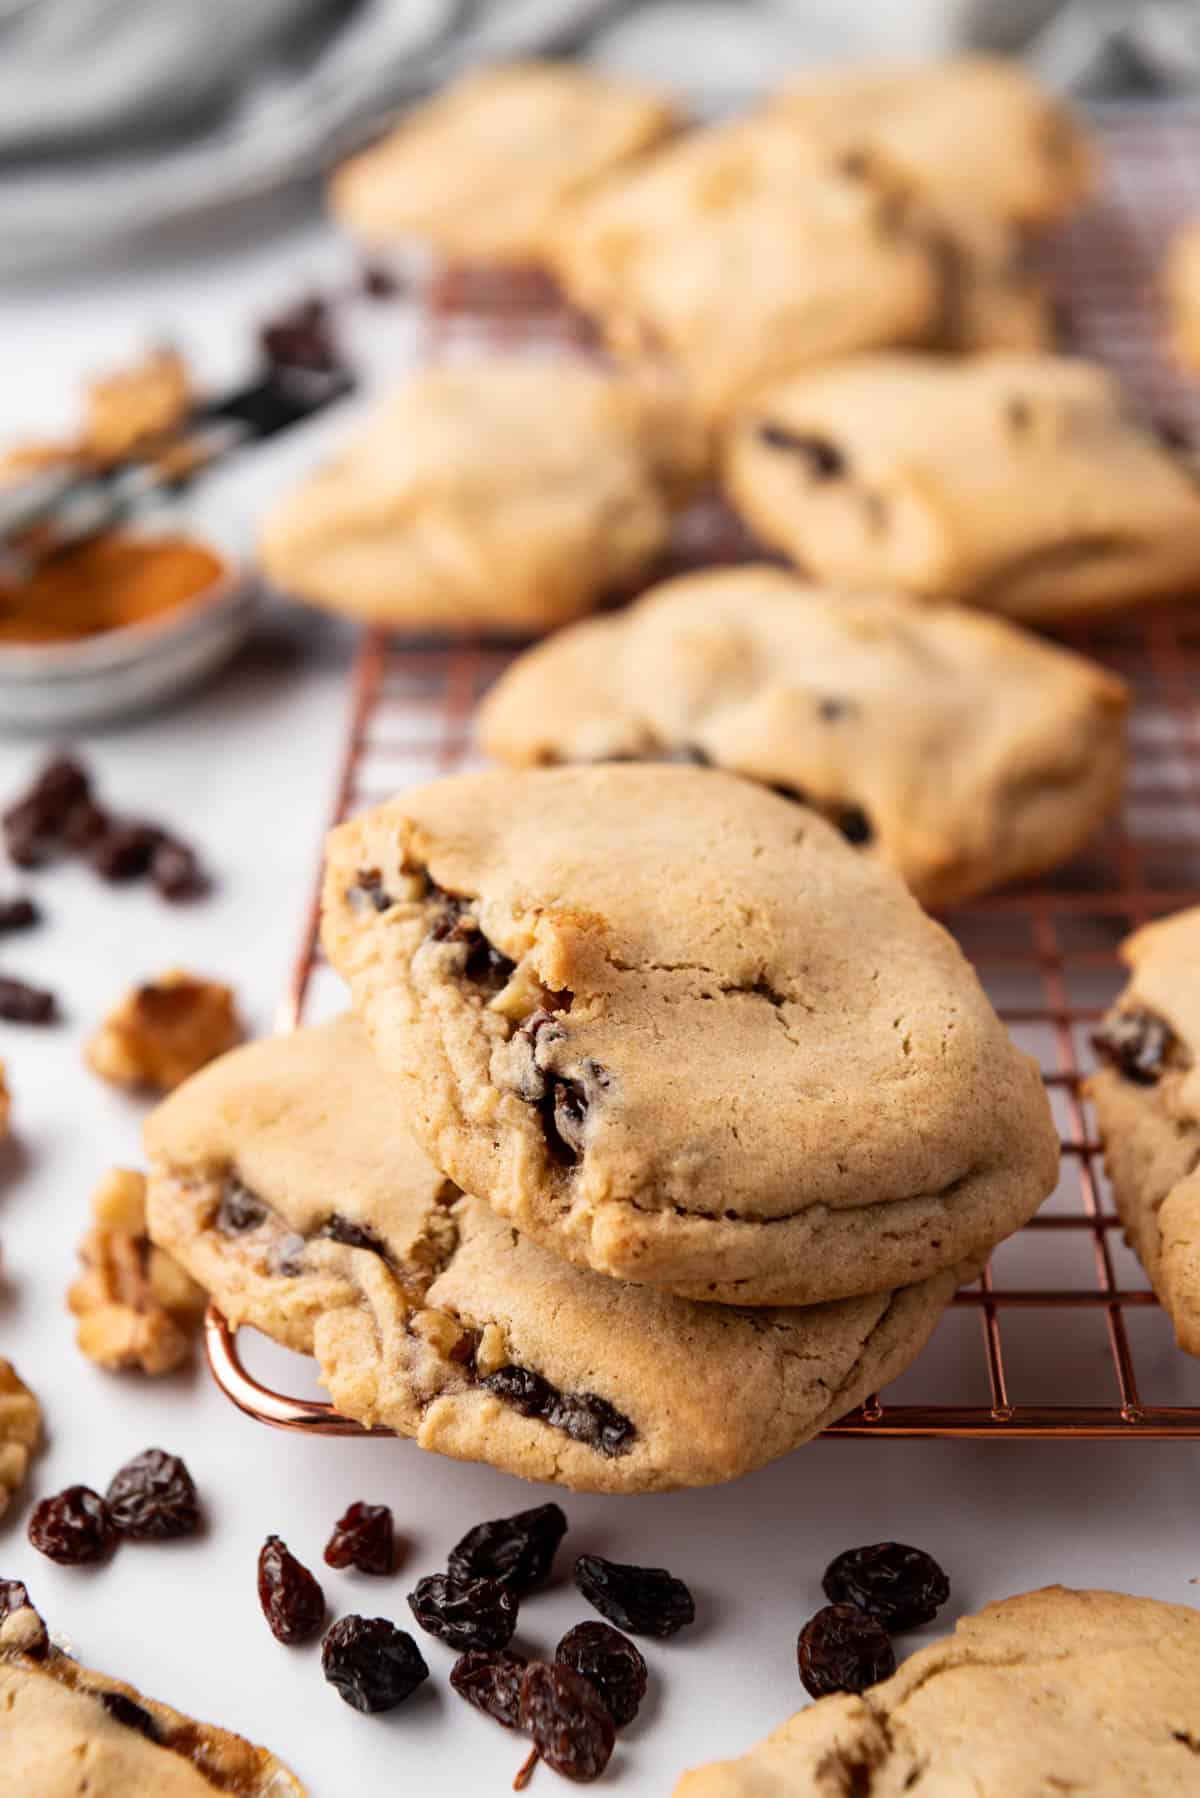 An image of two stacked raisin-filled cookies with raisins and walnuts and more cookies scattered around them.